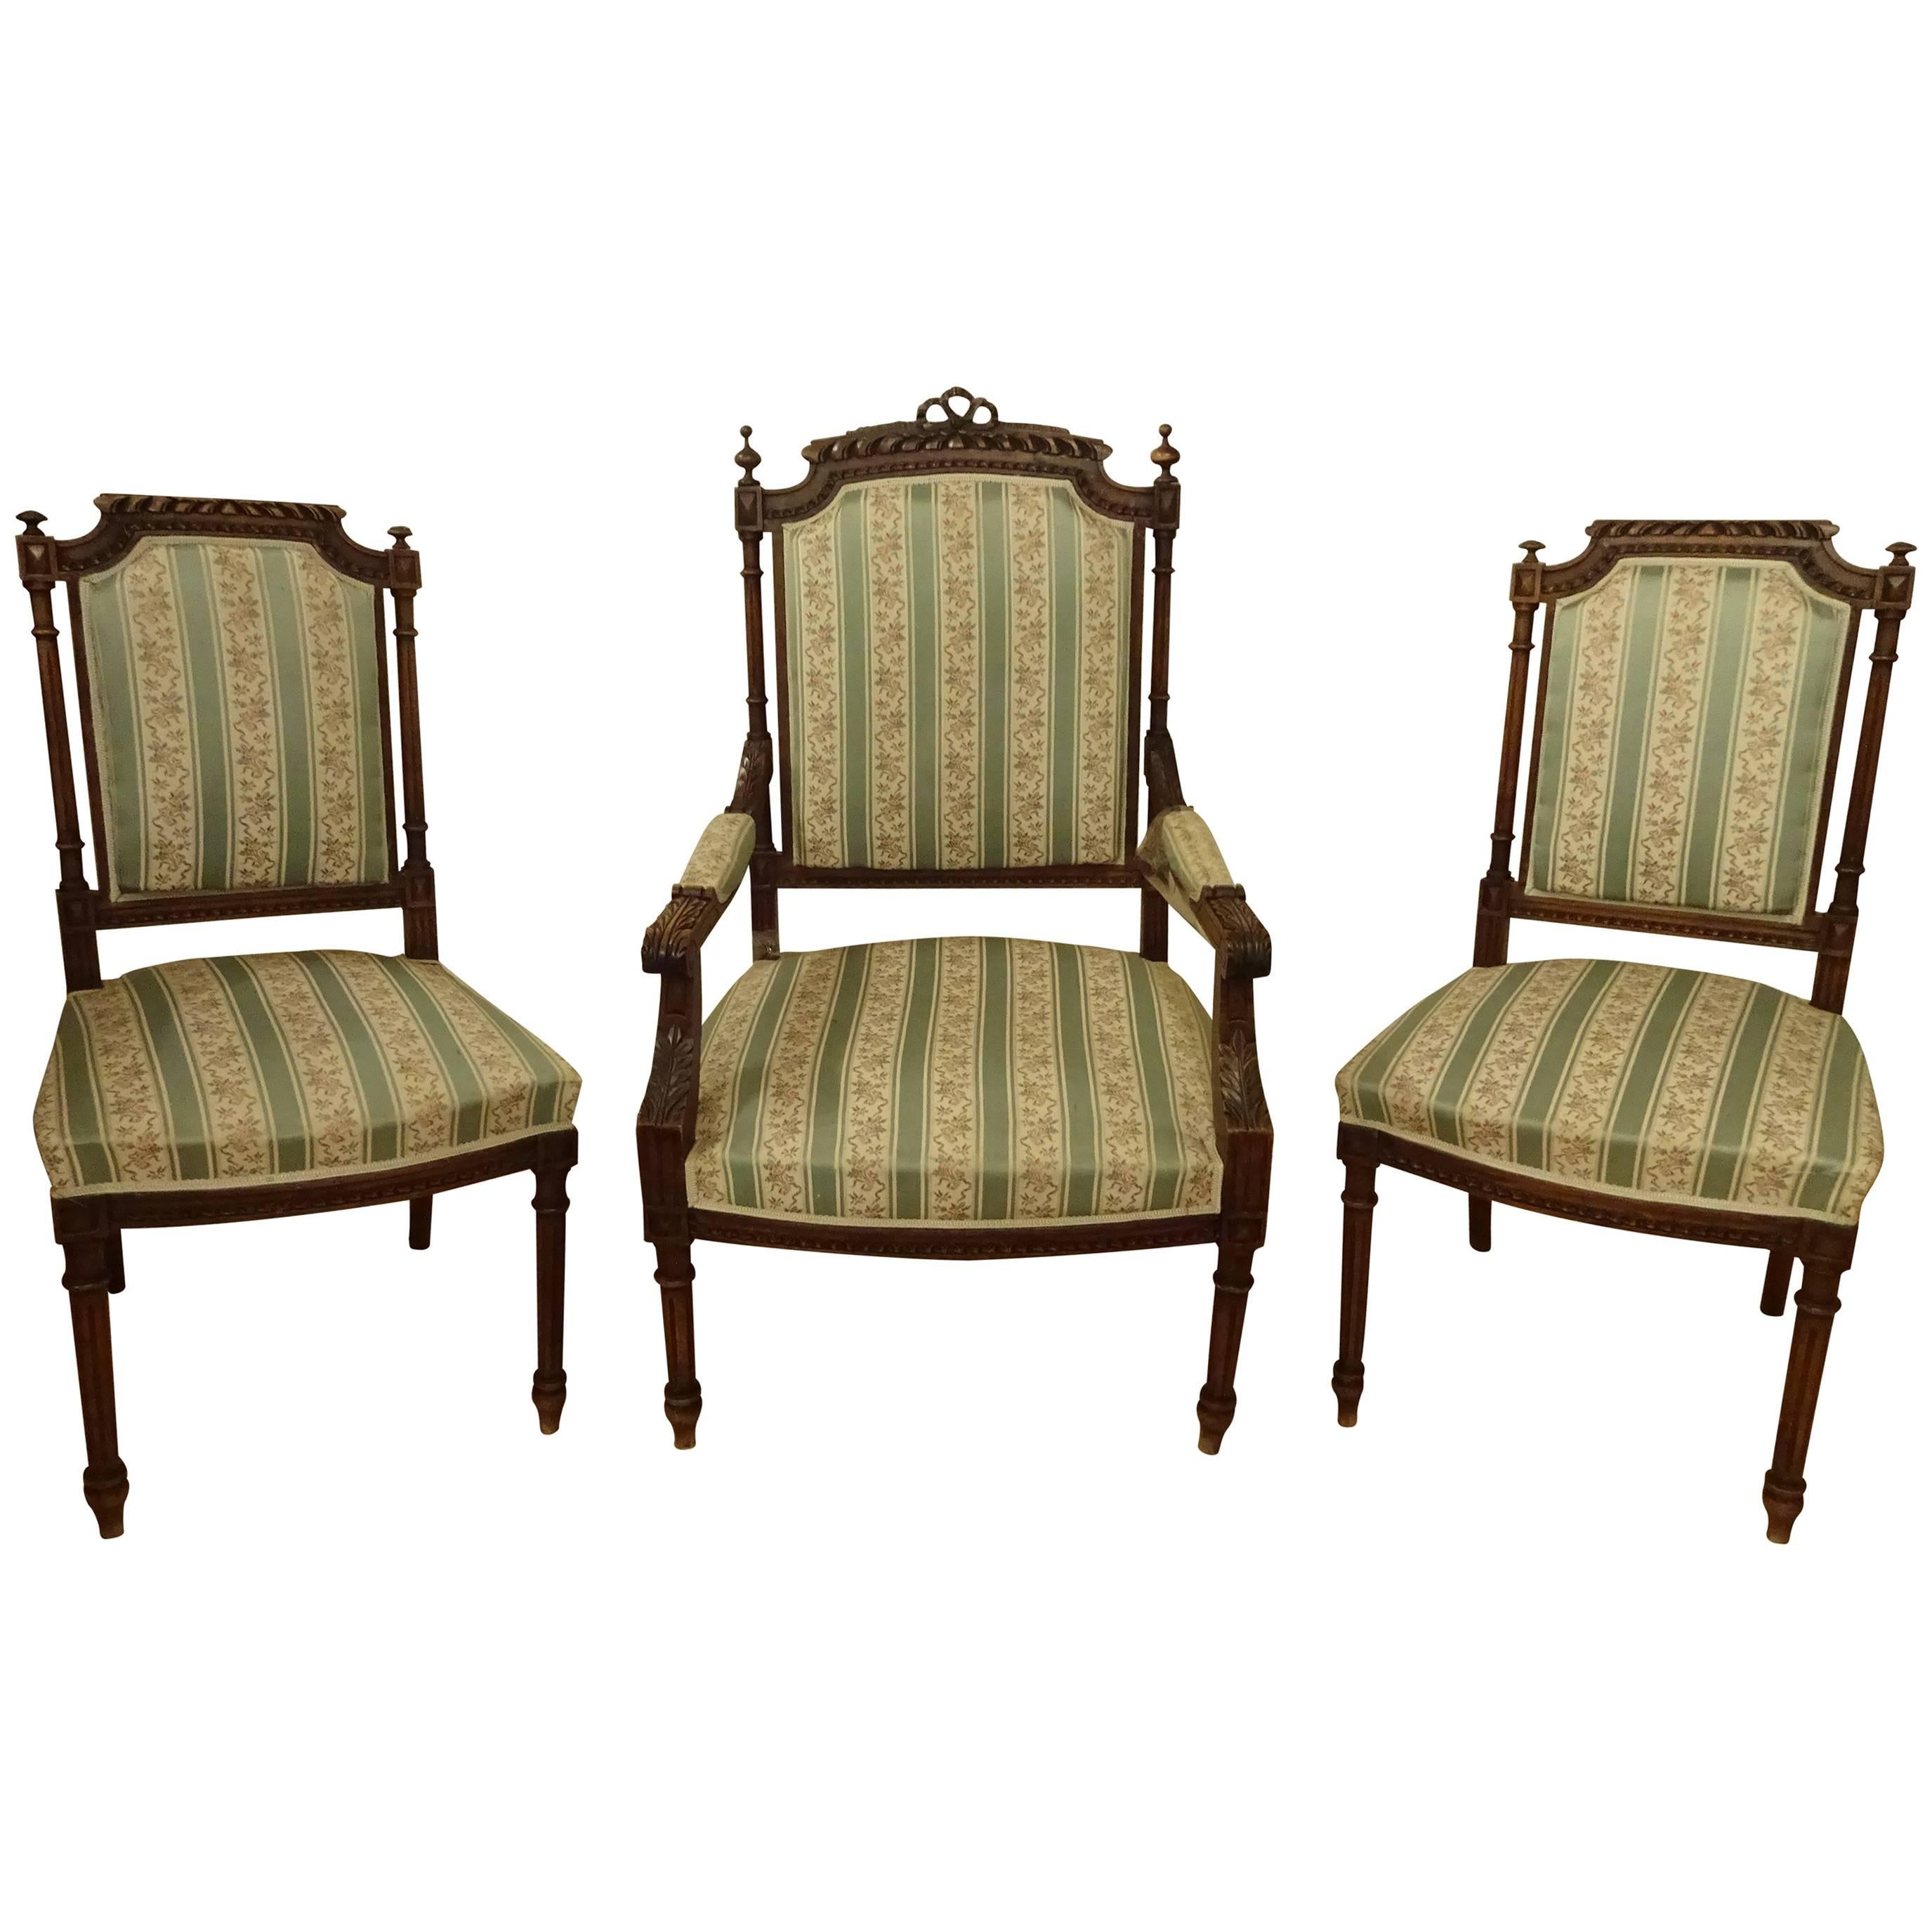 Suite Wooden One Fauteuil and Two Chairs